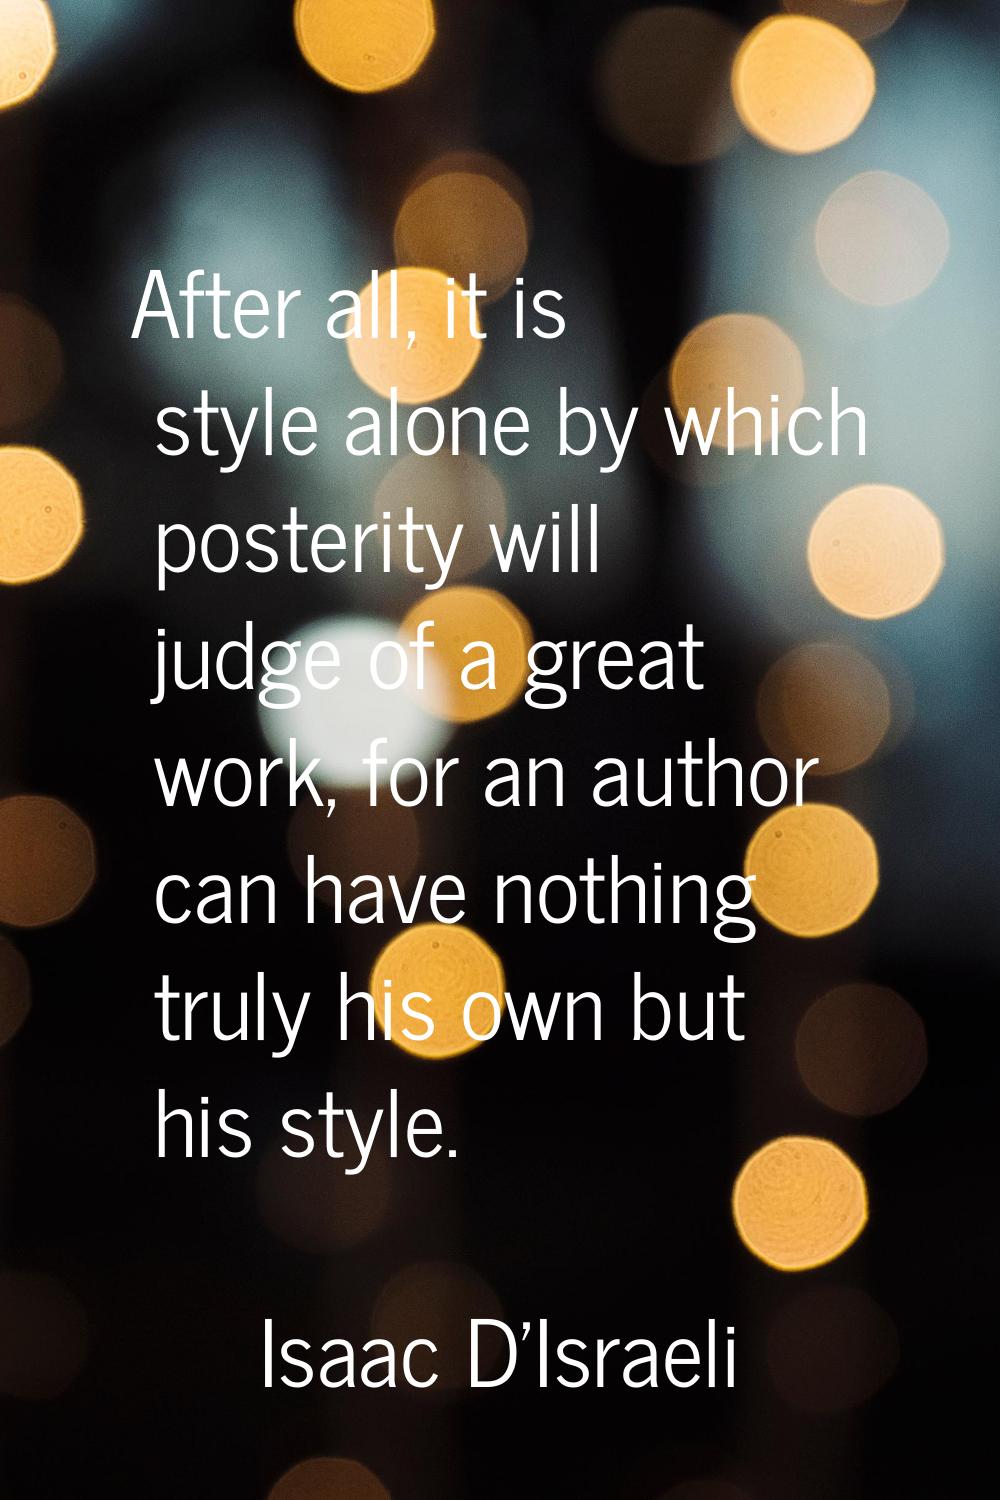 After all, it is style alone by which posterity will judge of a great work, for an author can have 